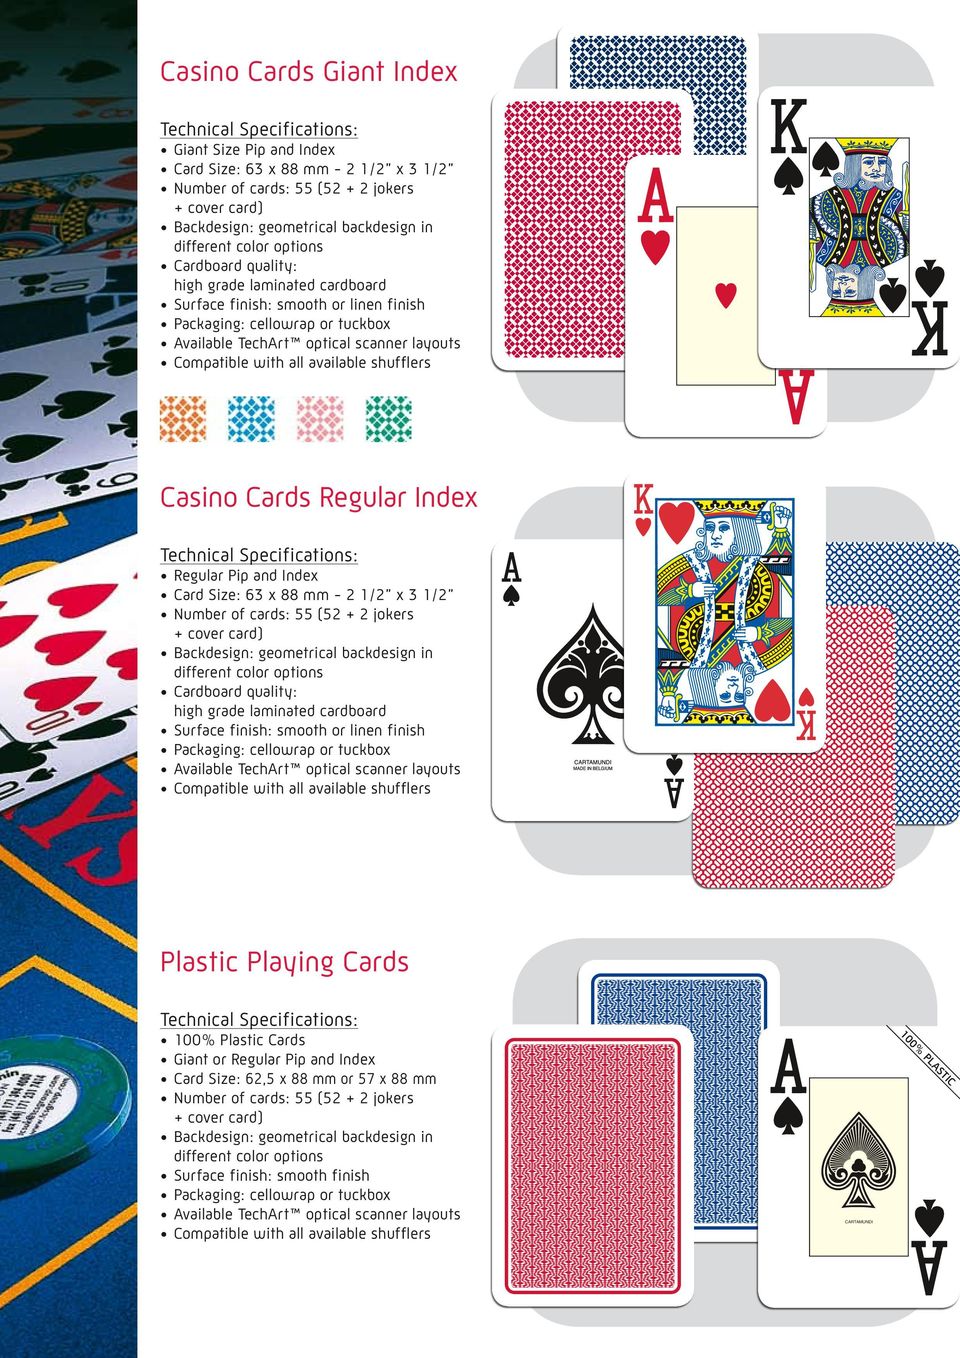 available shufflers Casino Cards Regular Index Regular Pip and Index Card Size: 63 x 88 mm - 2 1/2 x 3 1/2 Number of cards: 55 (52 + 2 jokers + cover card) Backdesign: geometrical backdesign in